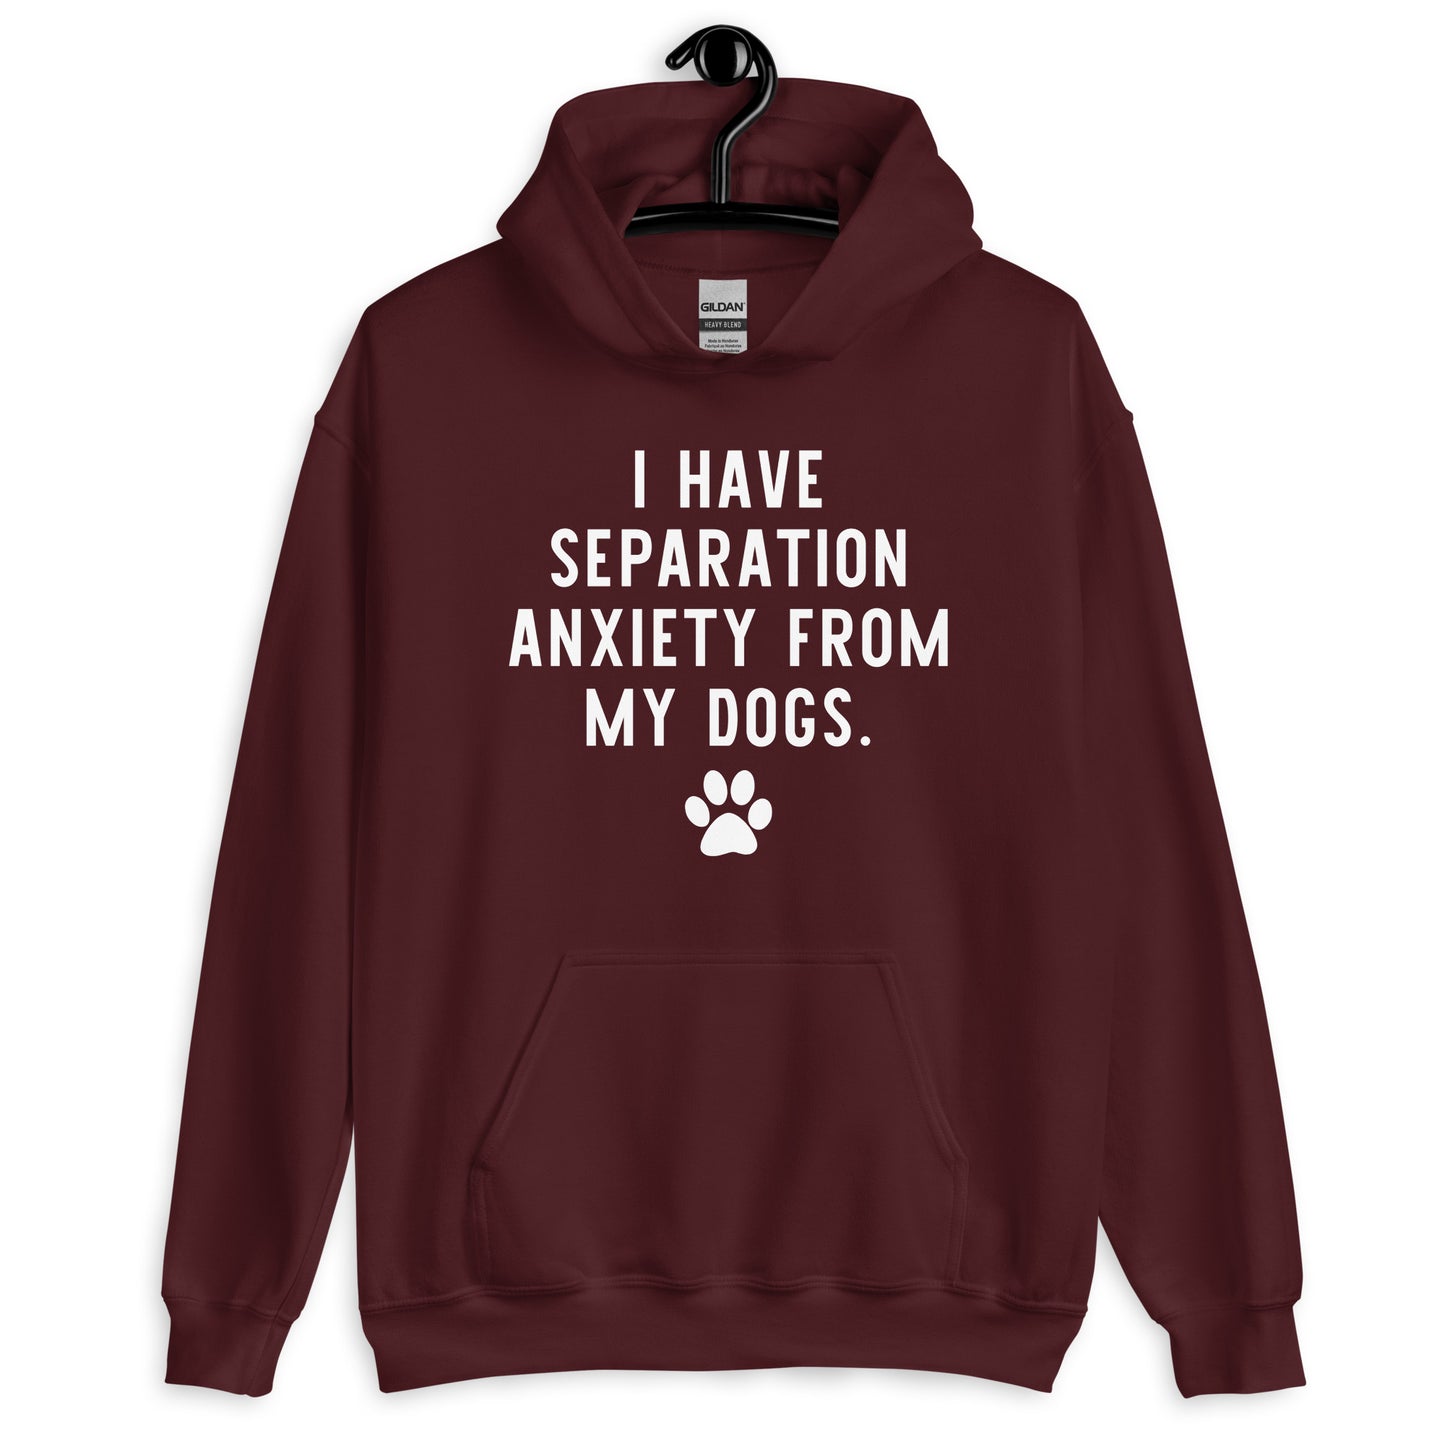 I Have Separation Anxiety from My Dogs Unisex Hoodie